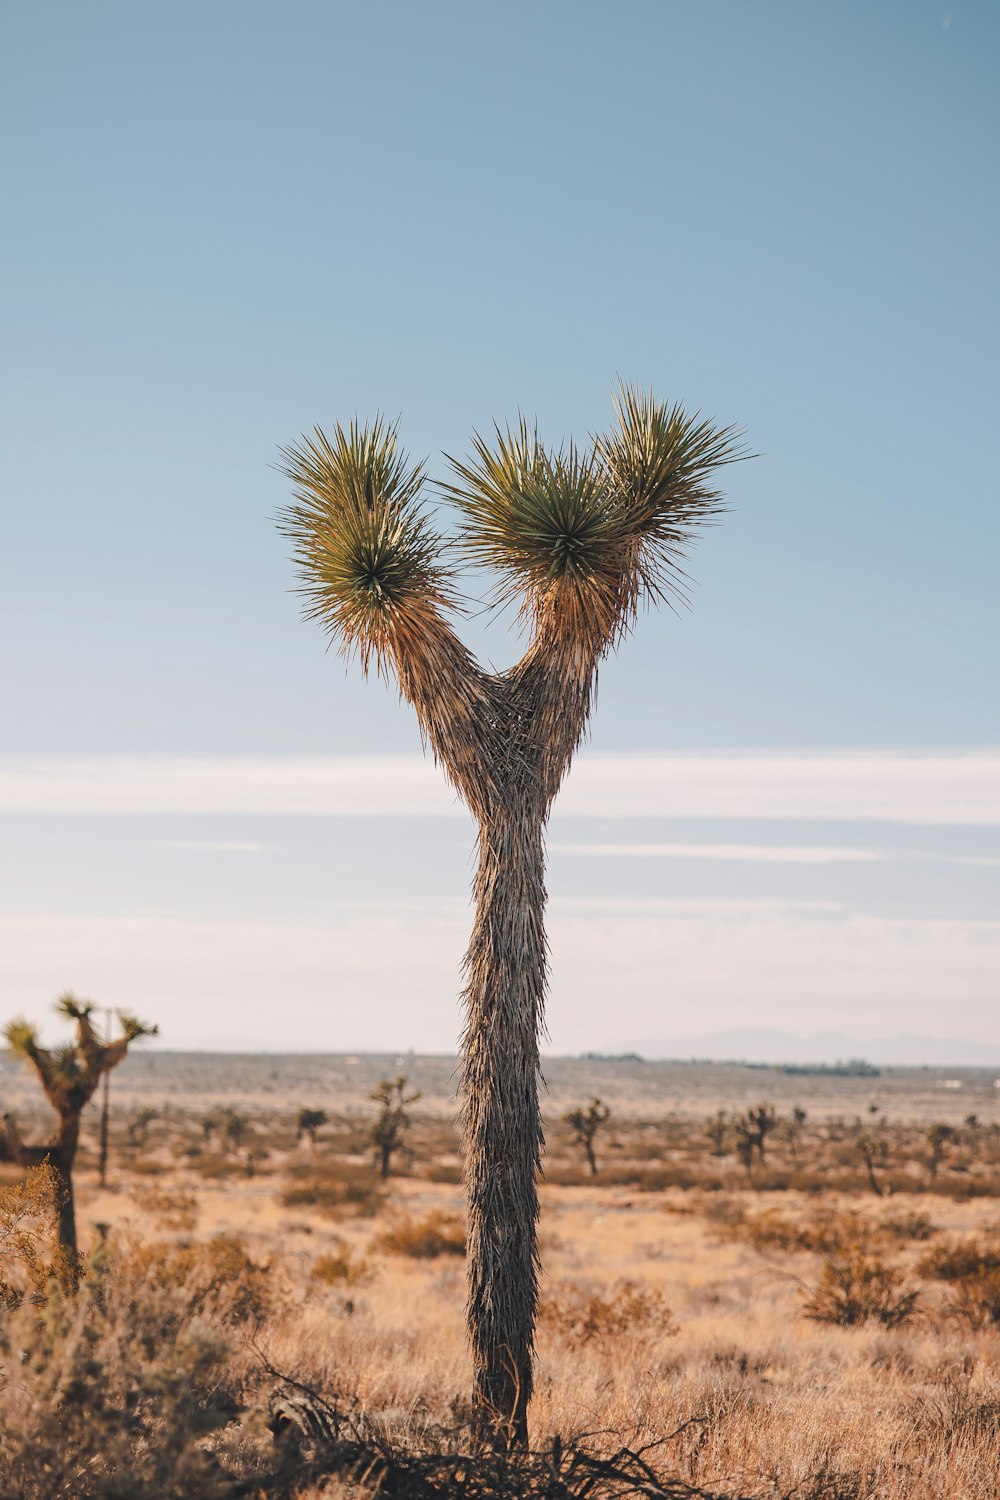 a tall cactus tree in the middle of a desert